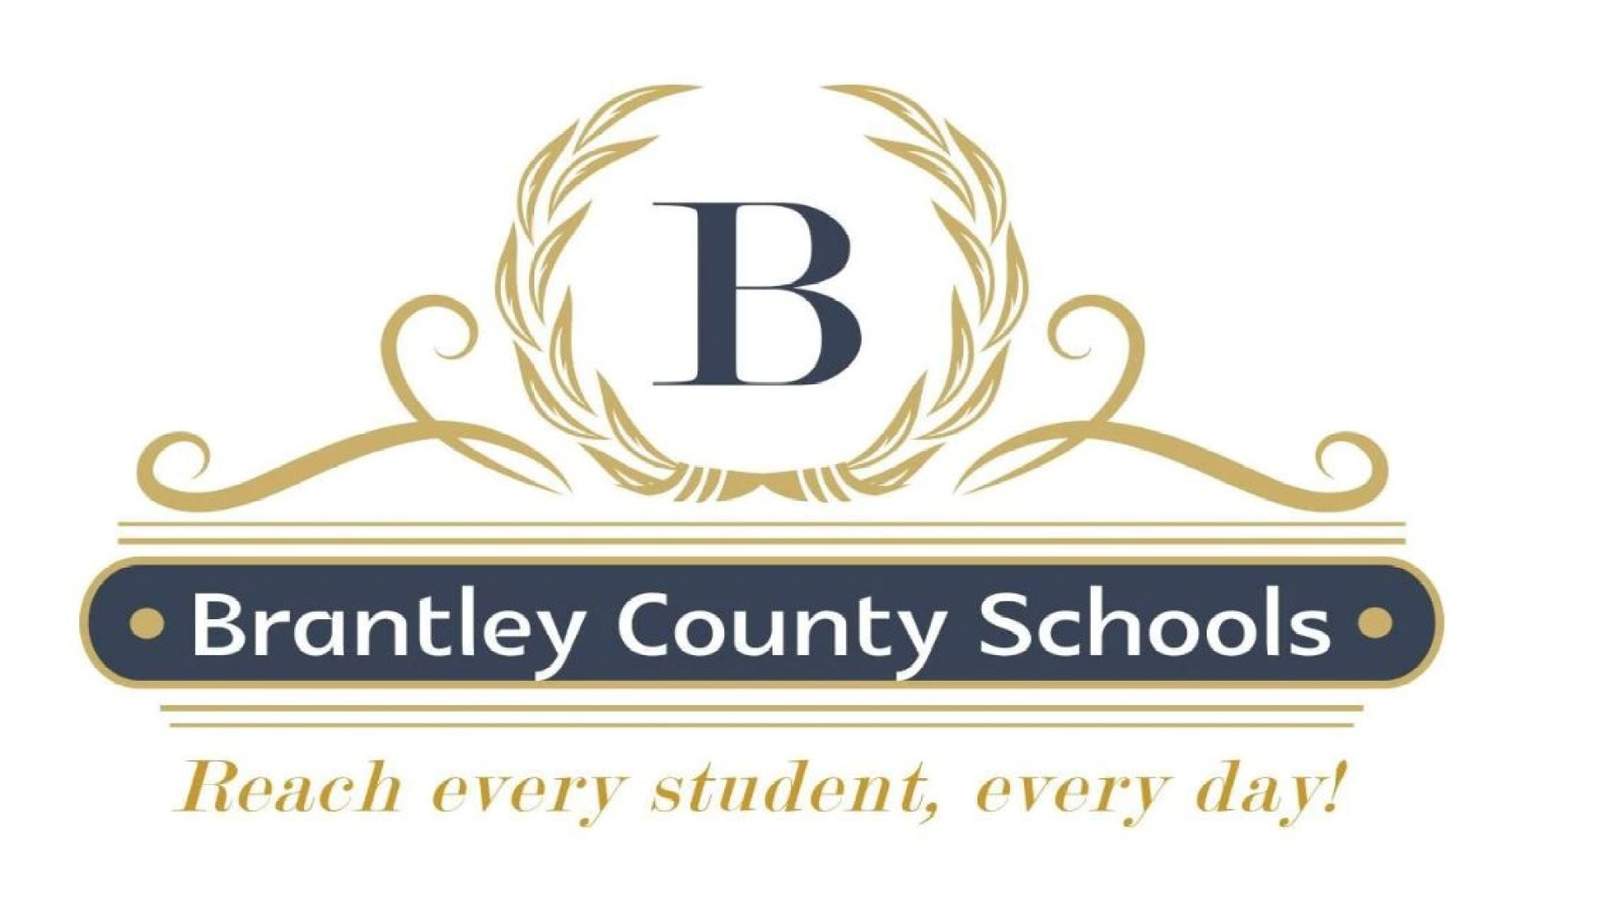 Masks optional under back-to-school plan in Brantley County